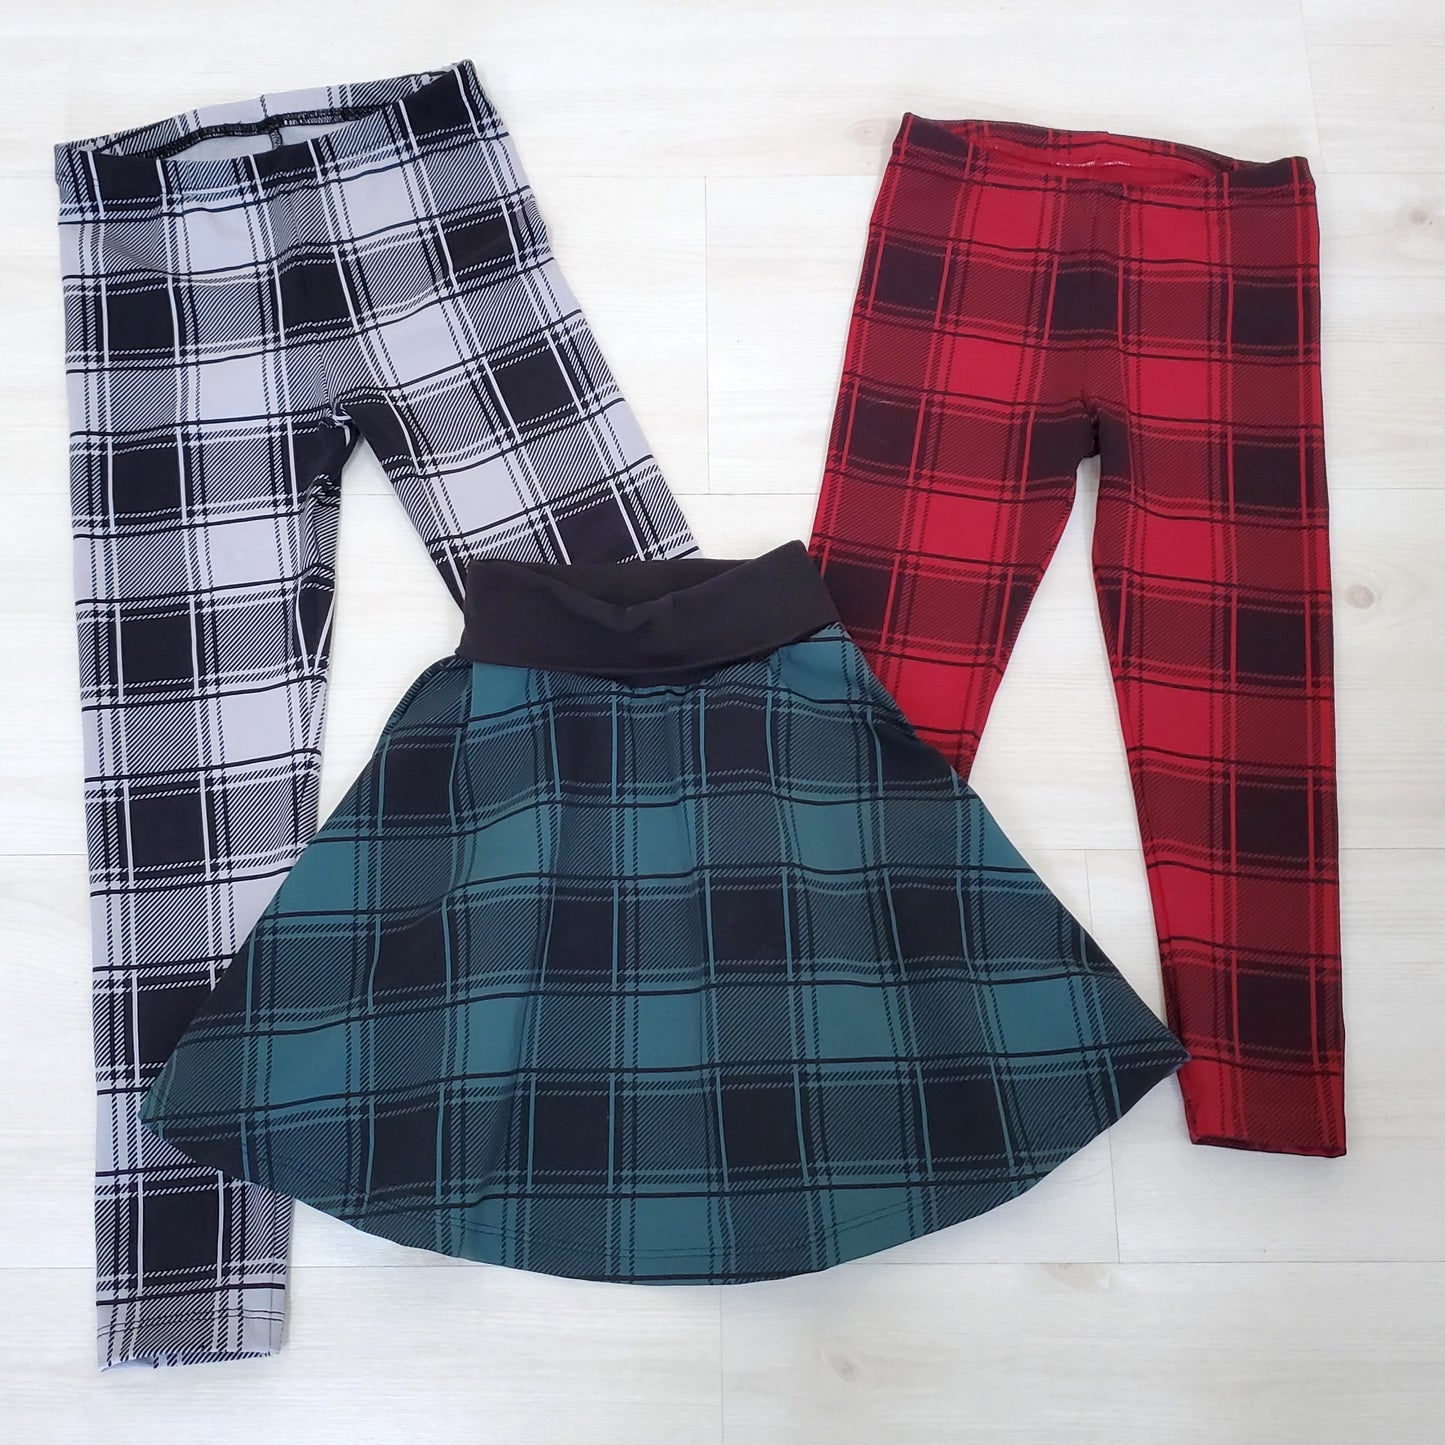 Plaid Leggings and Skirts for Children in Organic Cotton